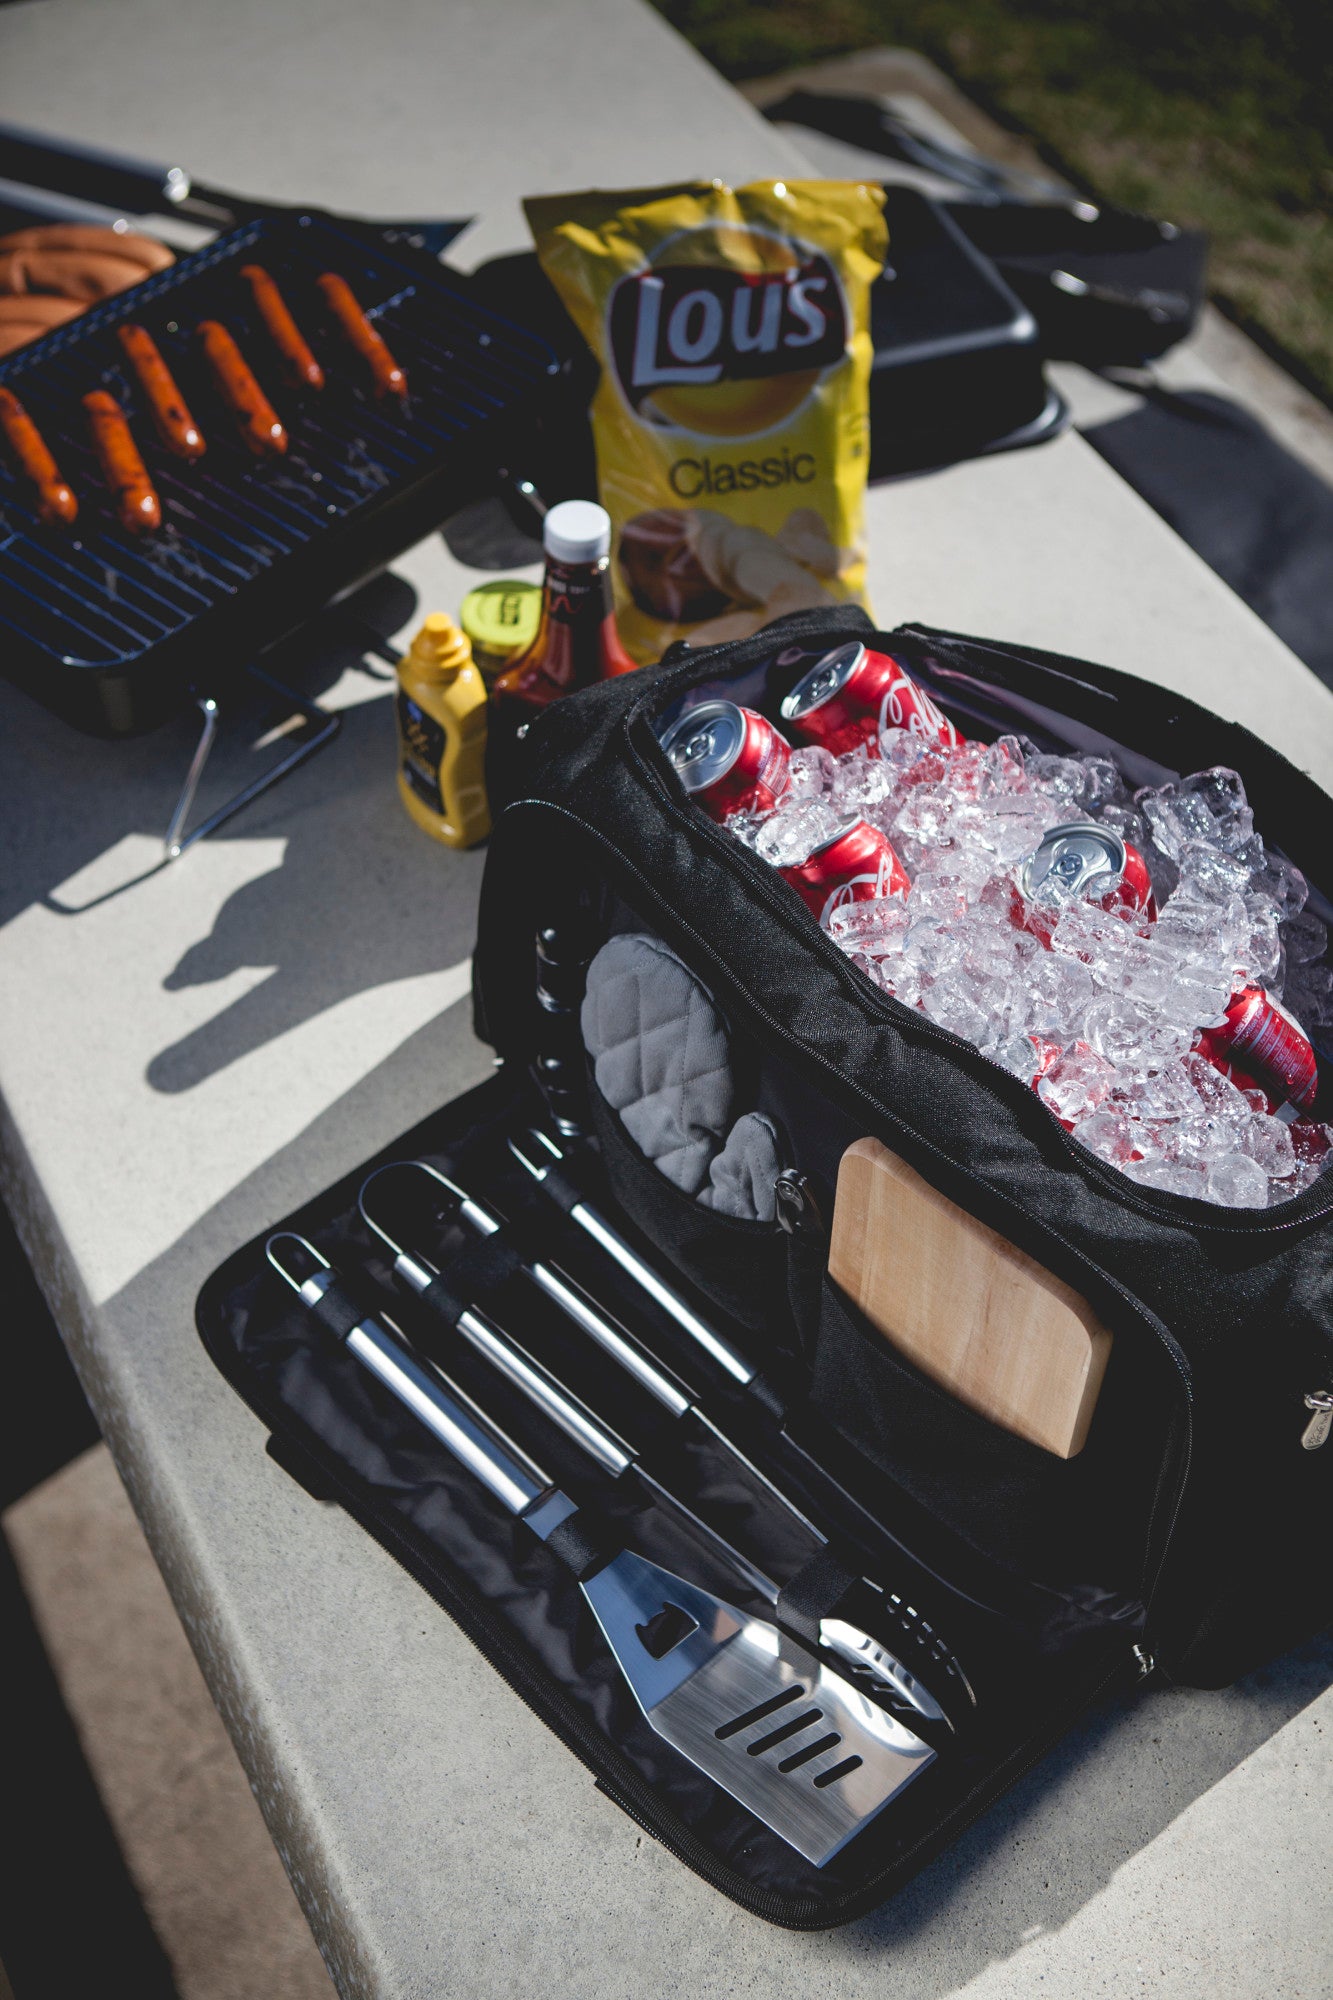 Tampa Bay Rays - BBQ Kit Grill Set & Cooler